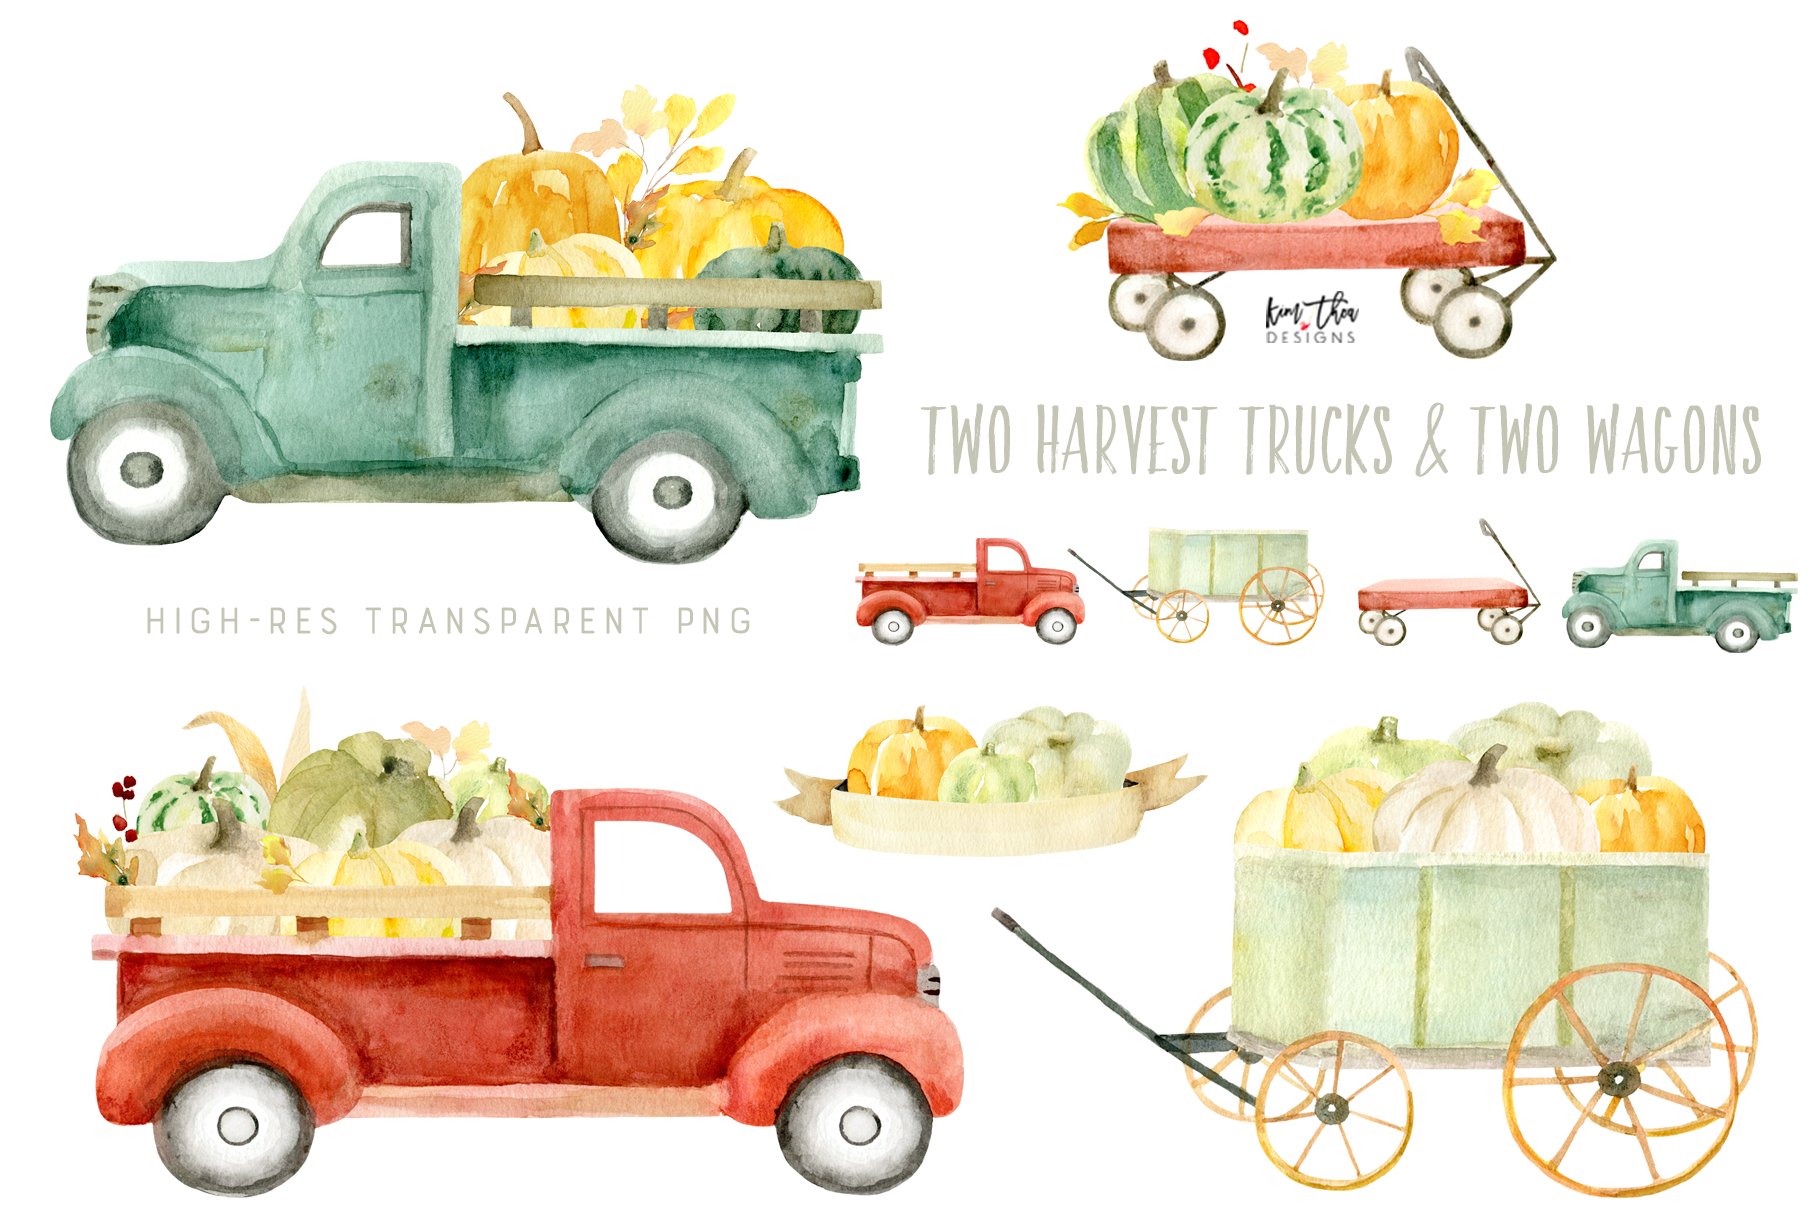 Some colorful trucks options for autumn mood.